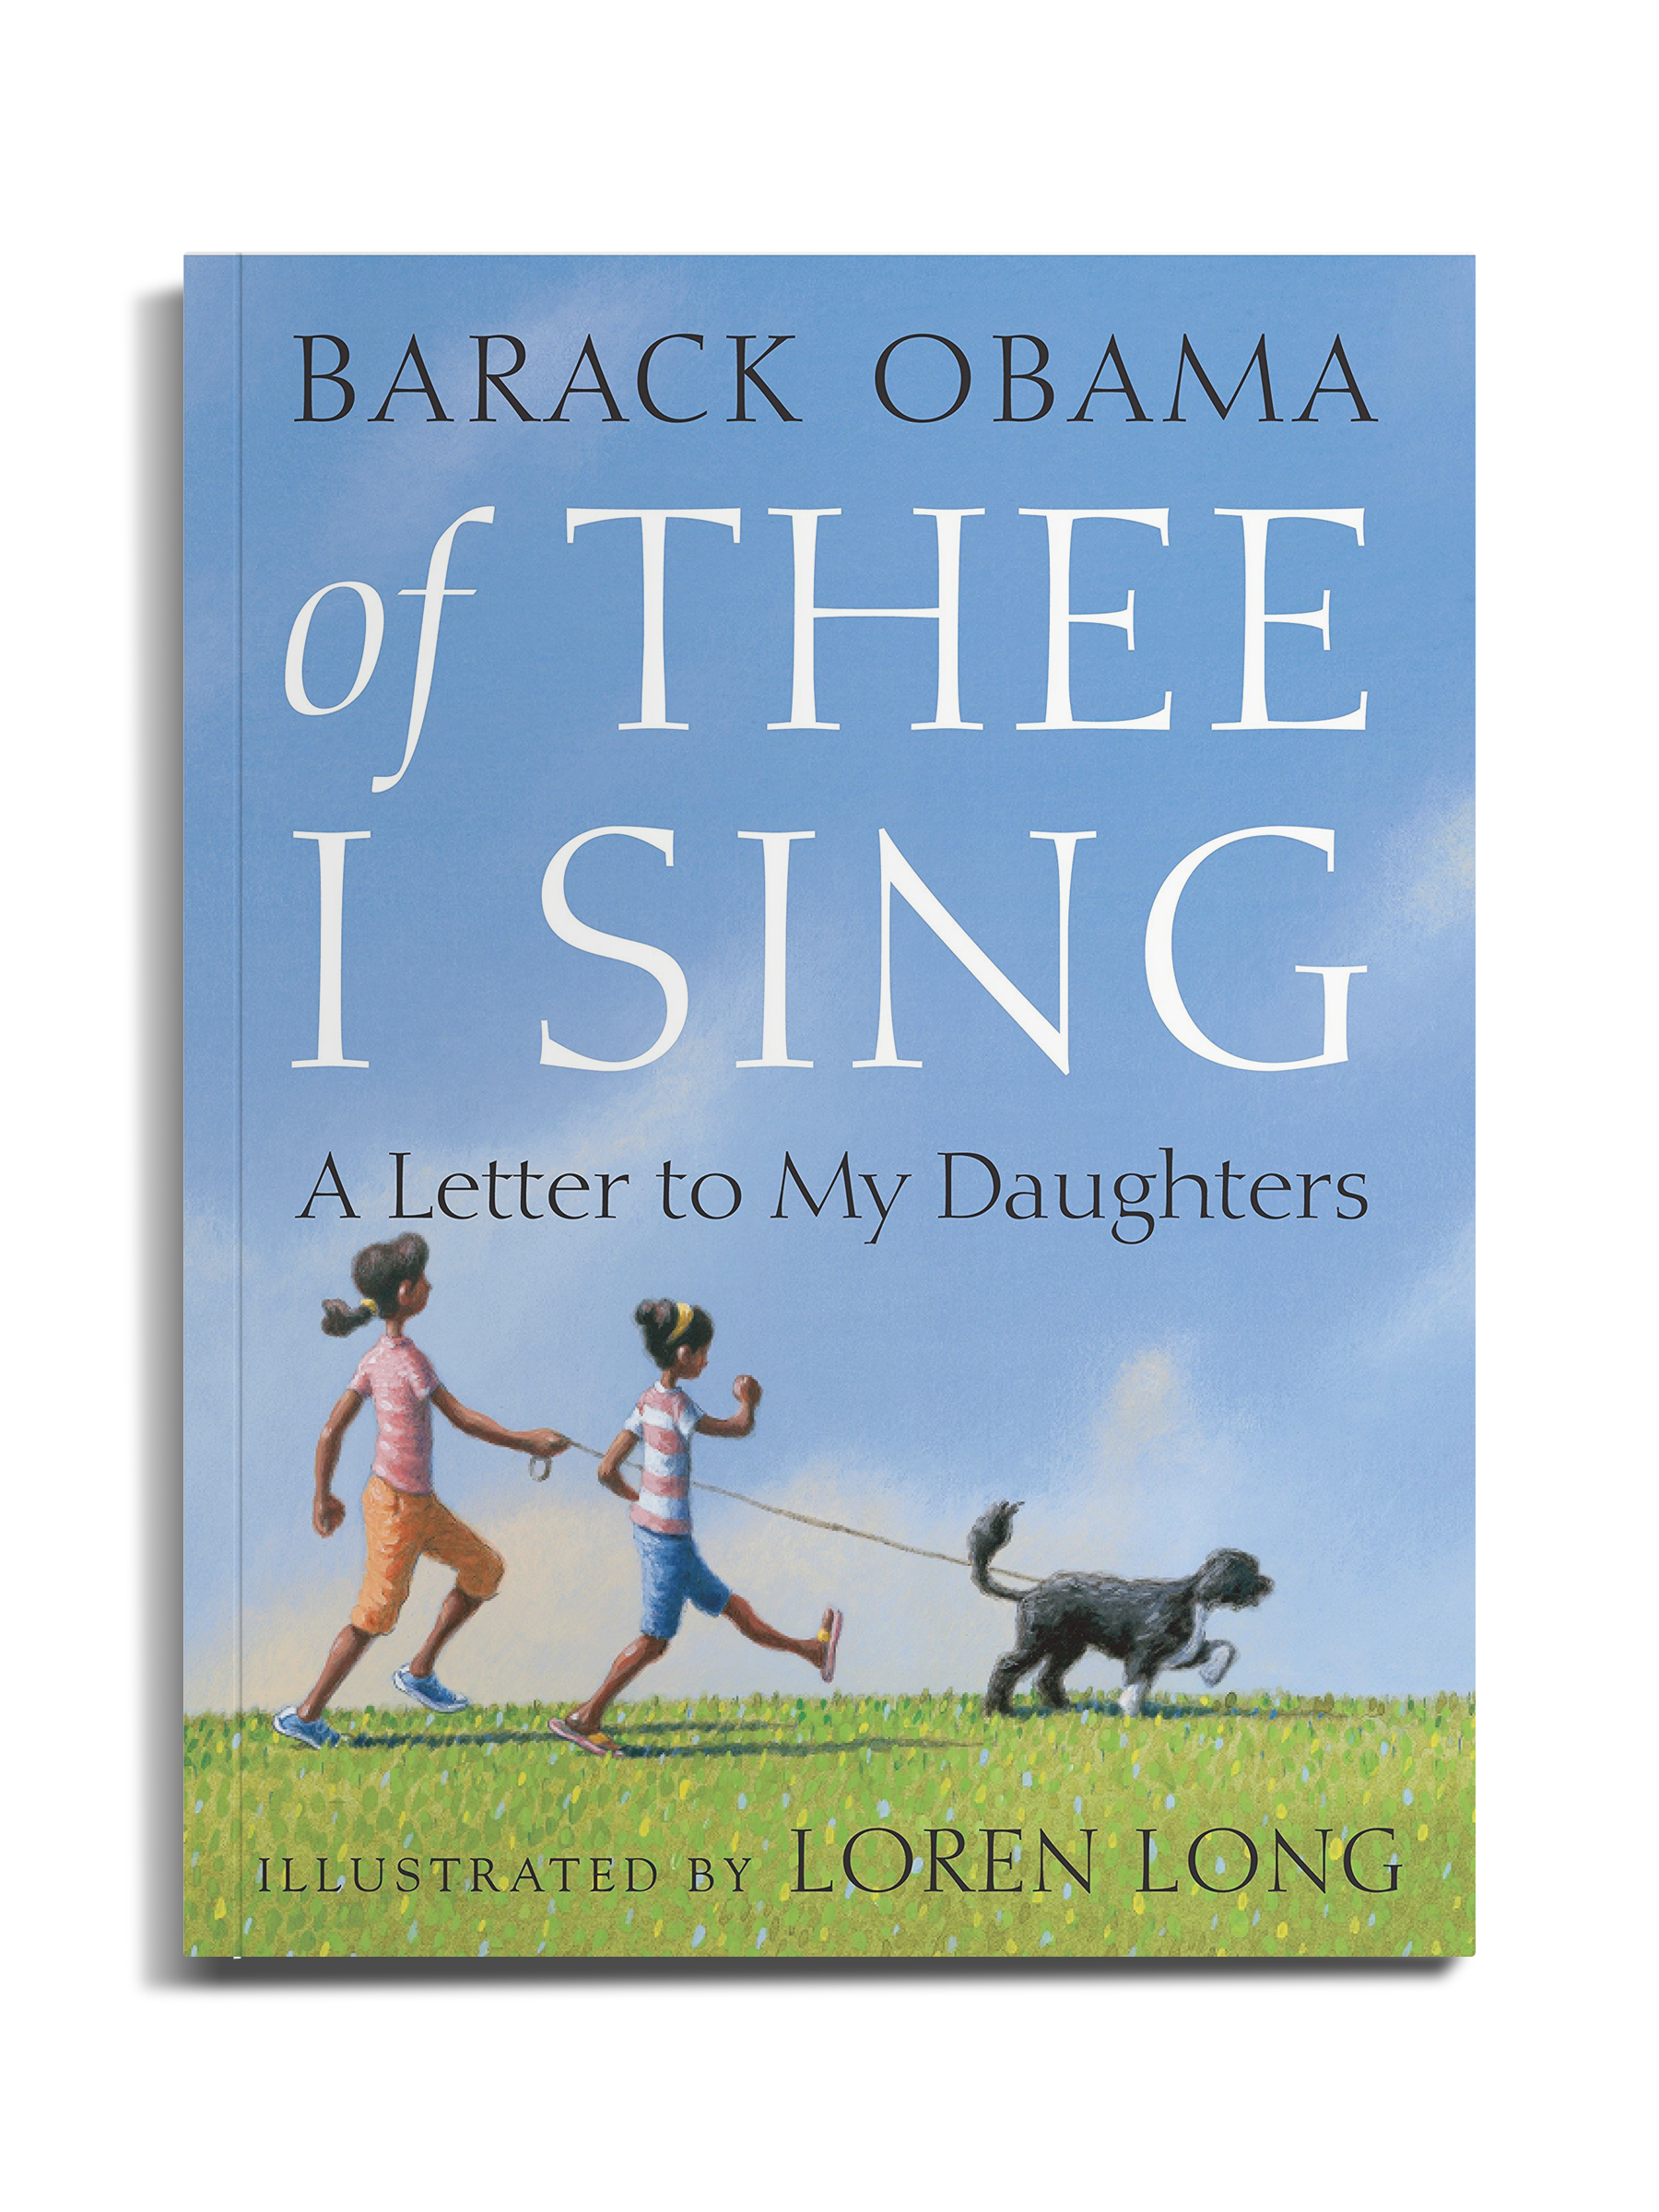 Of Thee I Sing: A Letter To My Daughters by Barack Obama